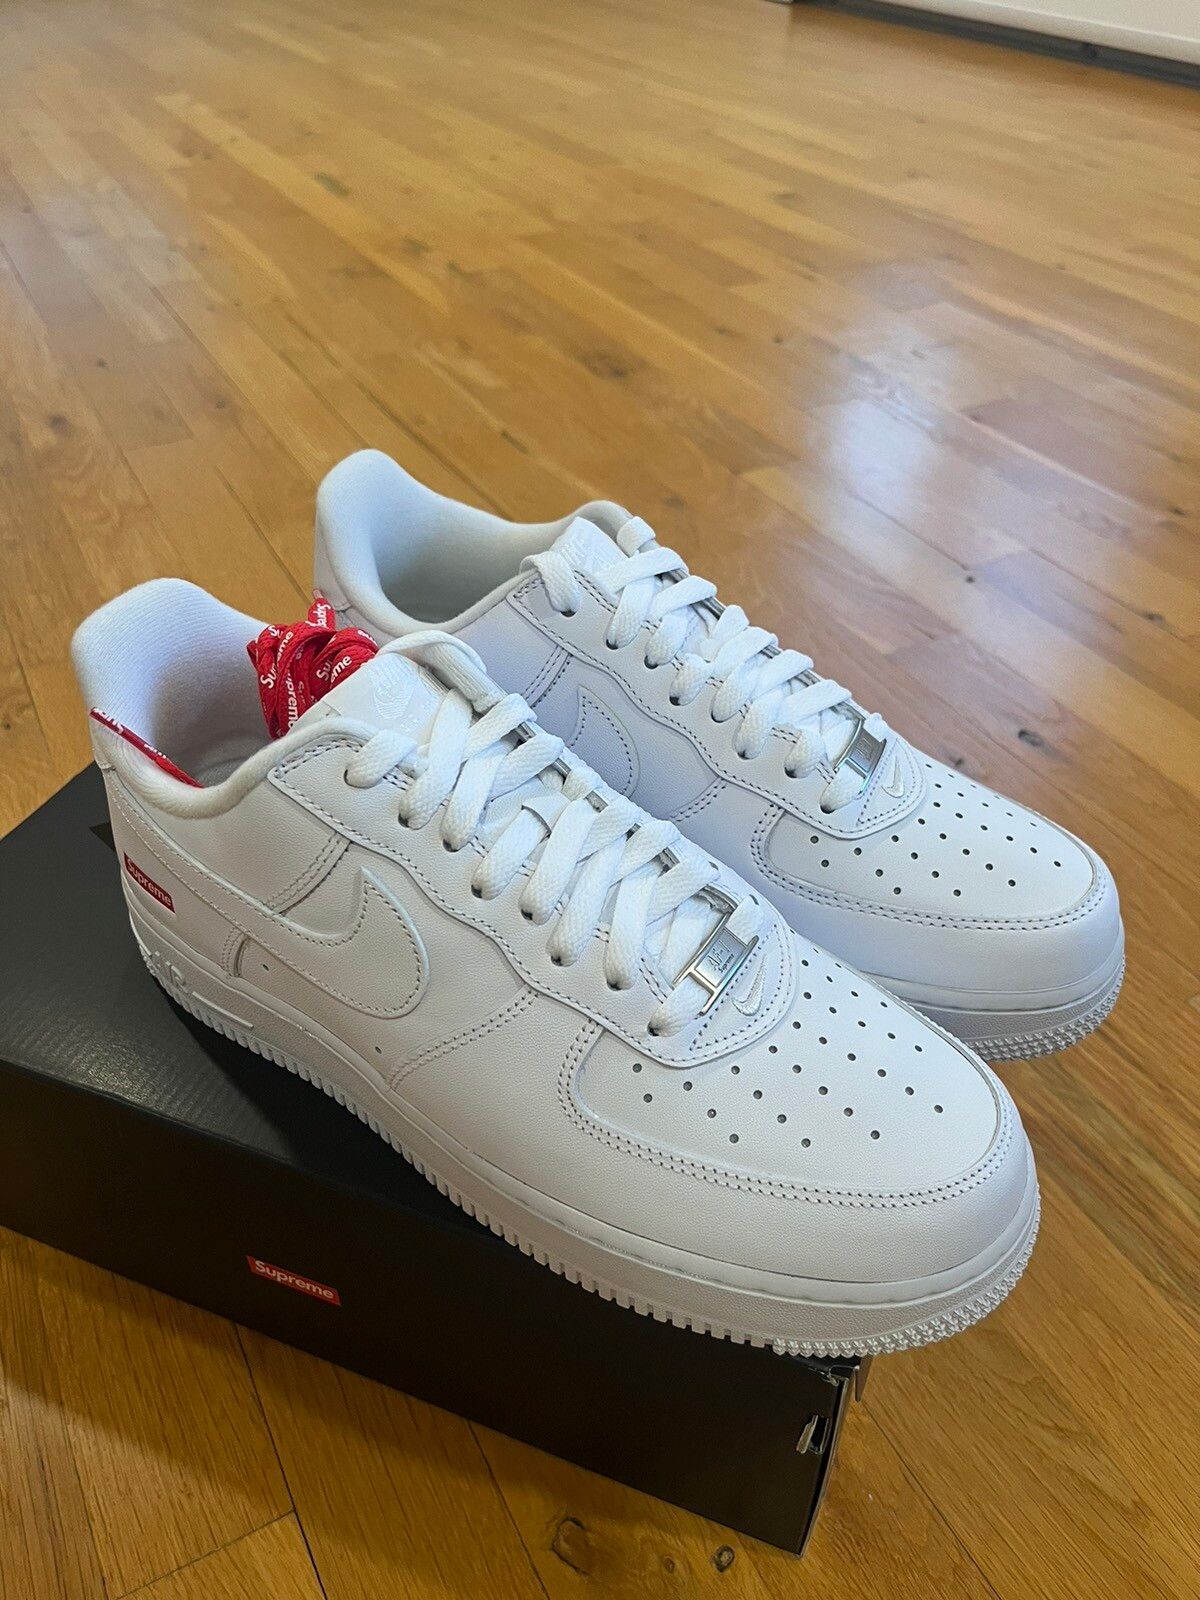 Pre-owned Supreme Air Force 1 Sp Shoes In White